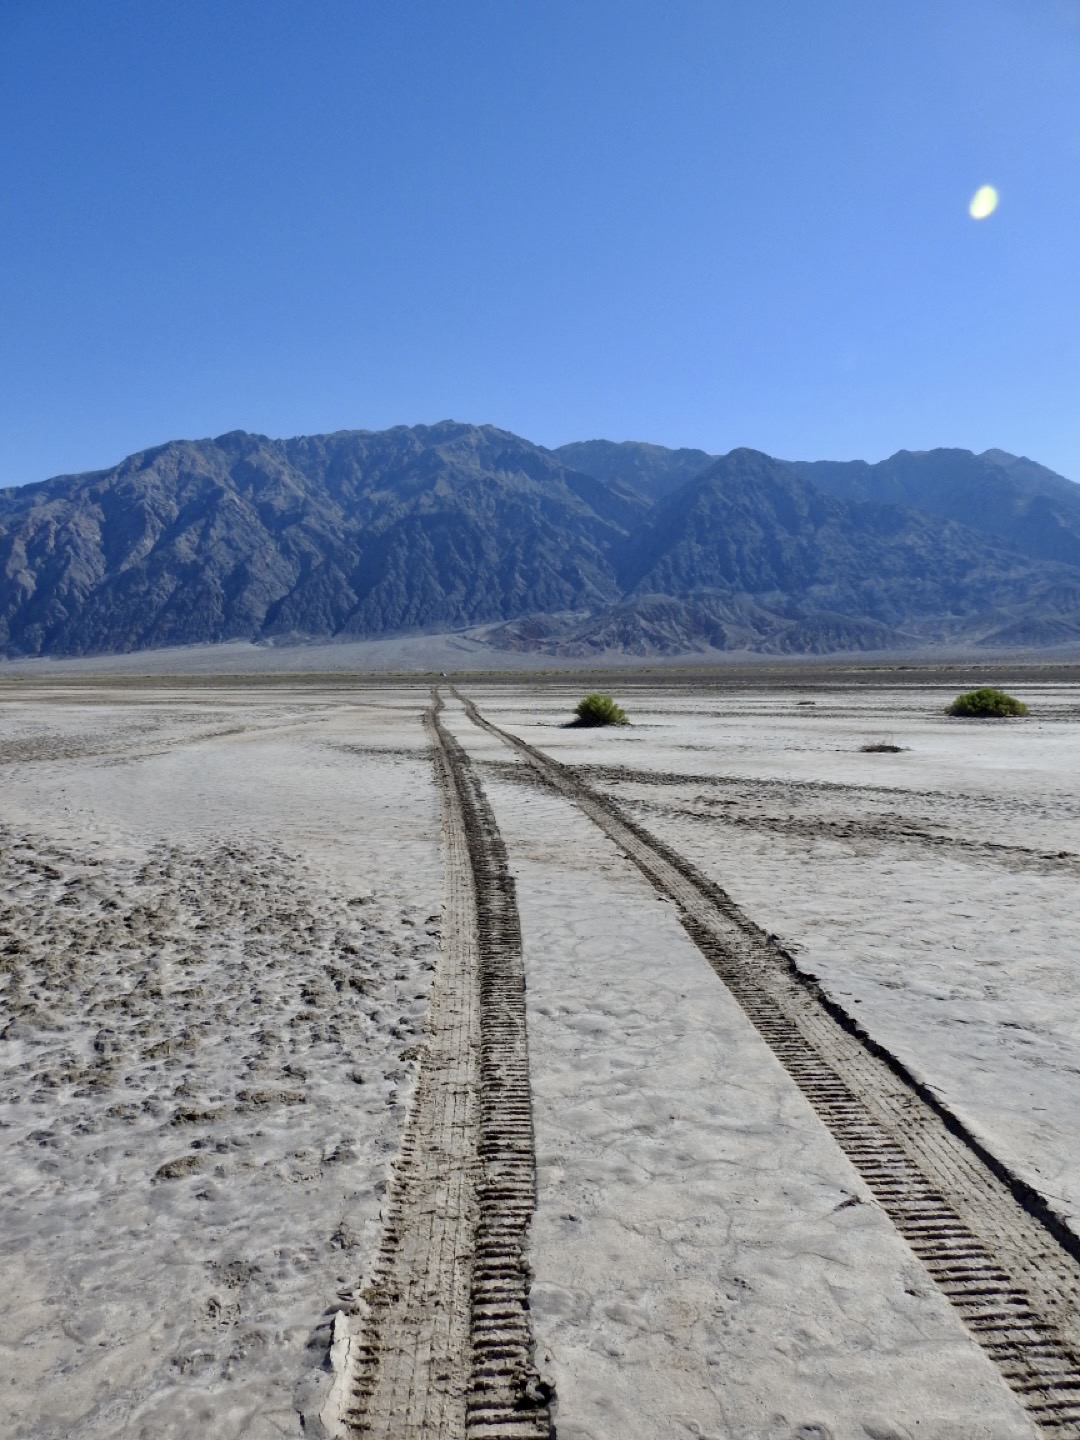 Vehicle tracks run from the camera out into a flat open ground toward distant mountains.